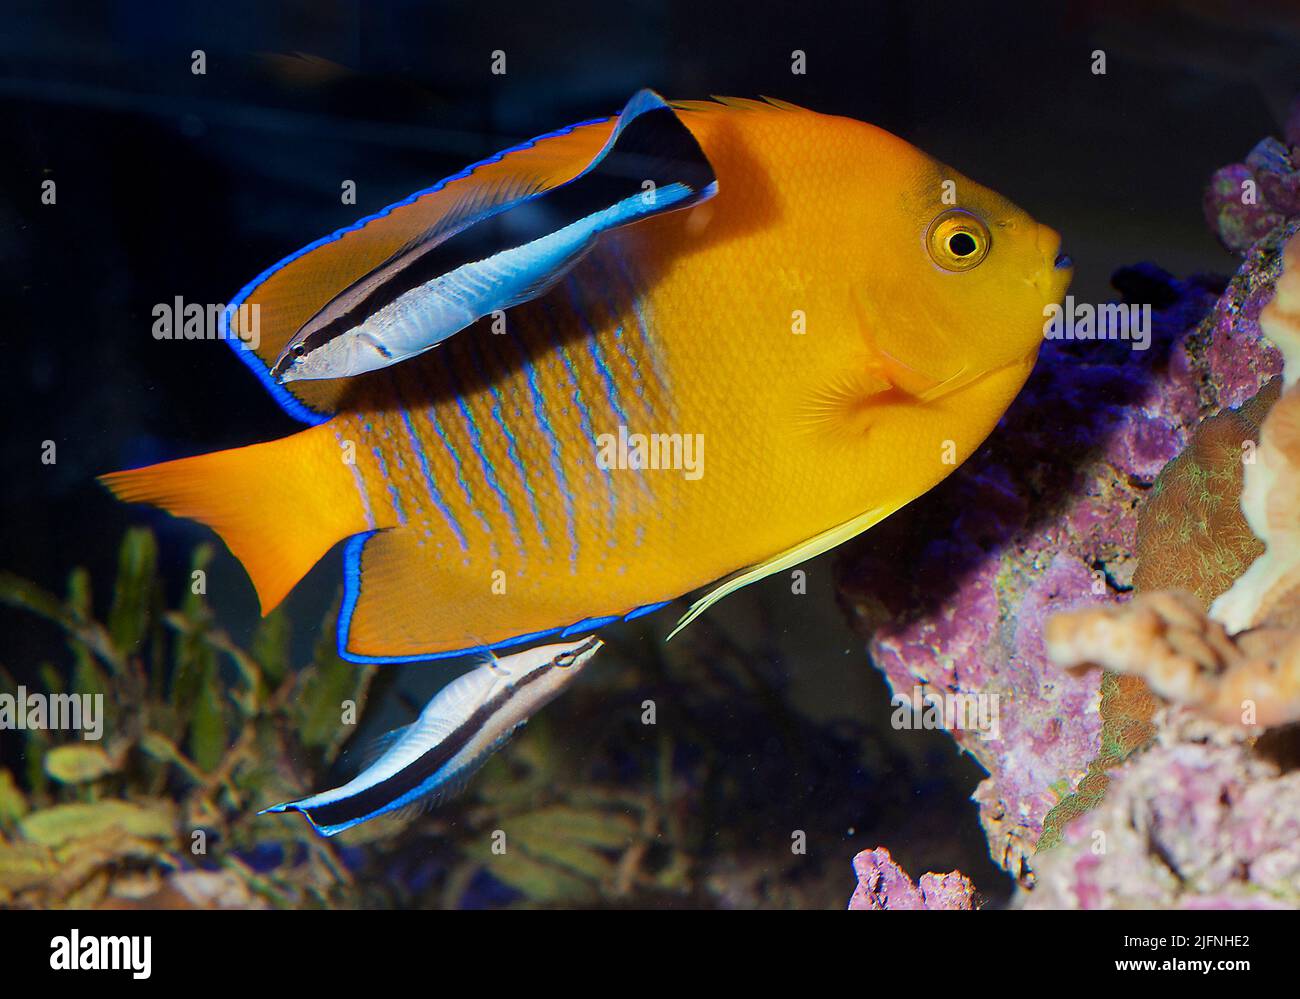 Cleaner wrasse (Labroides dimidiatus) cleaning the Clarion Angelfish (Holacanthus clarionensis) in a small reef aquarium. Stock Photo